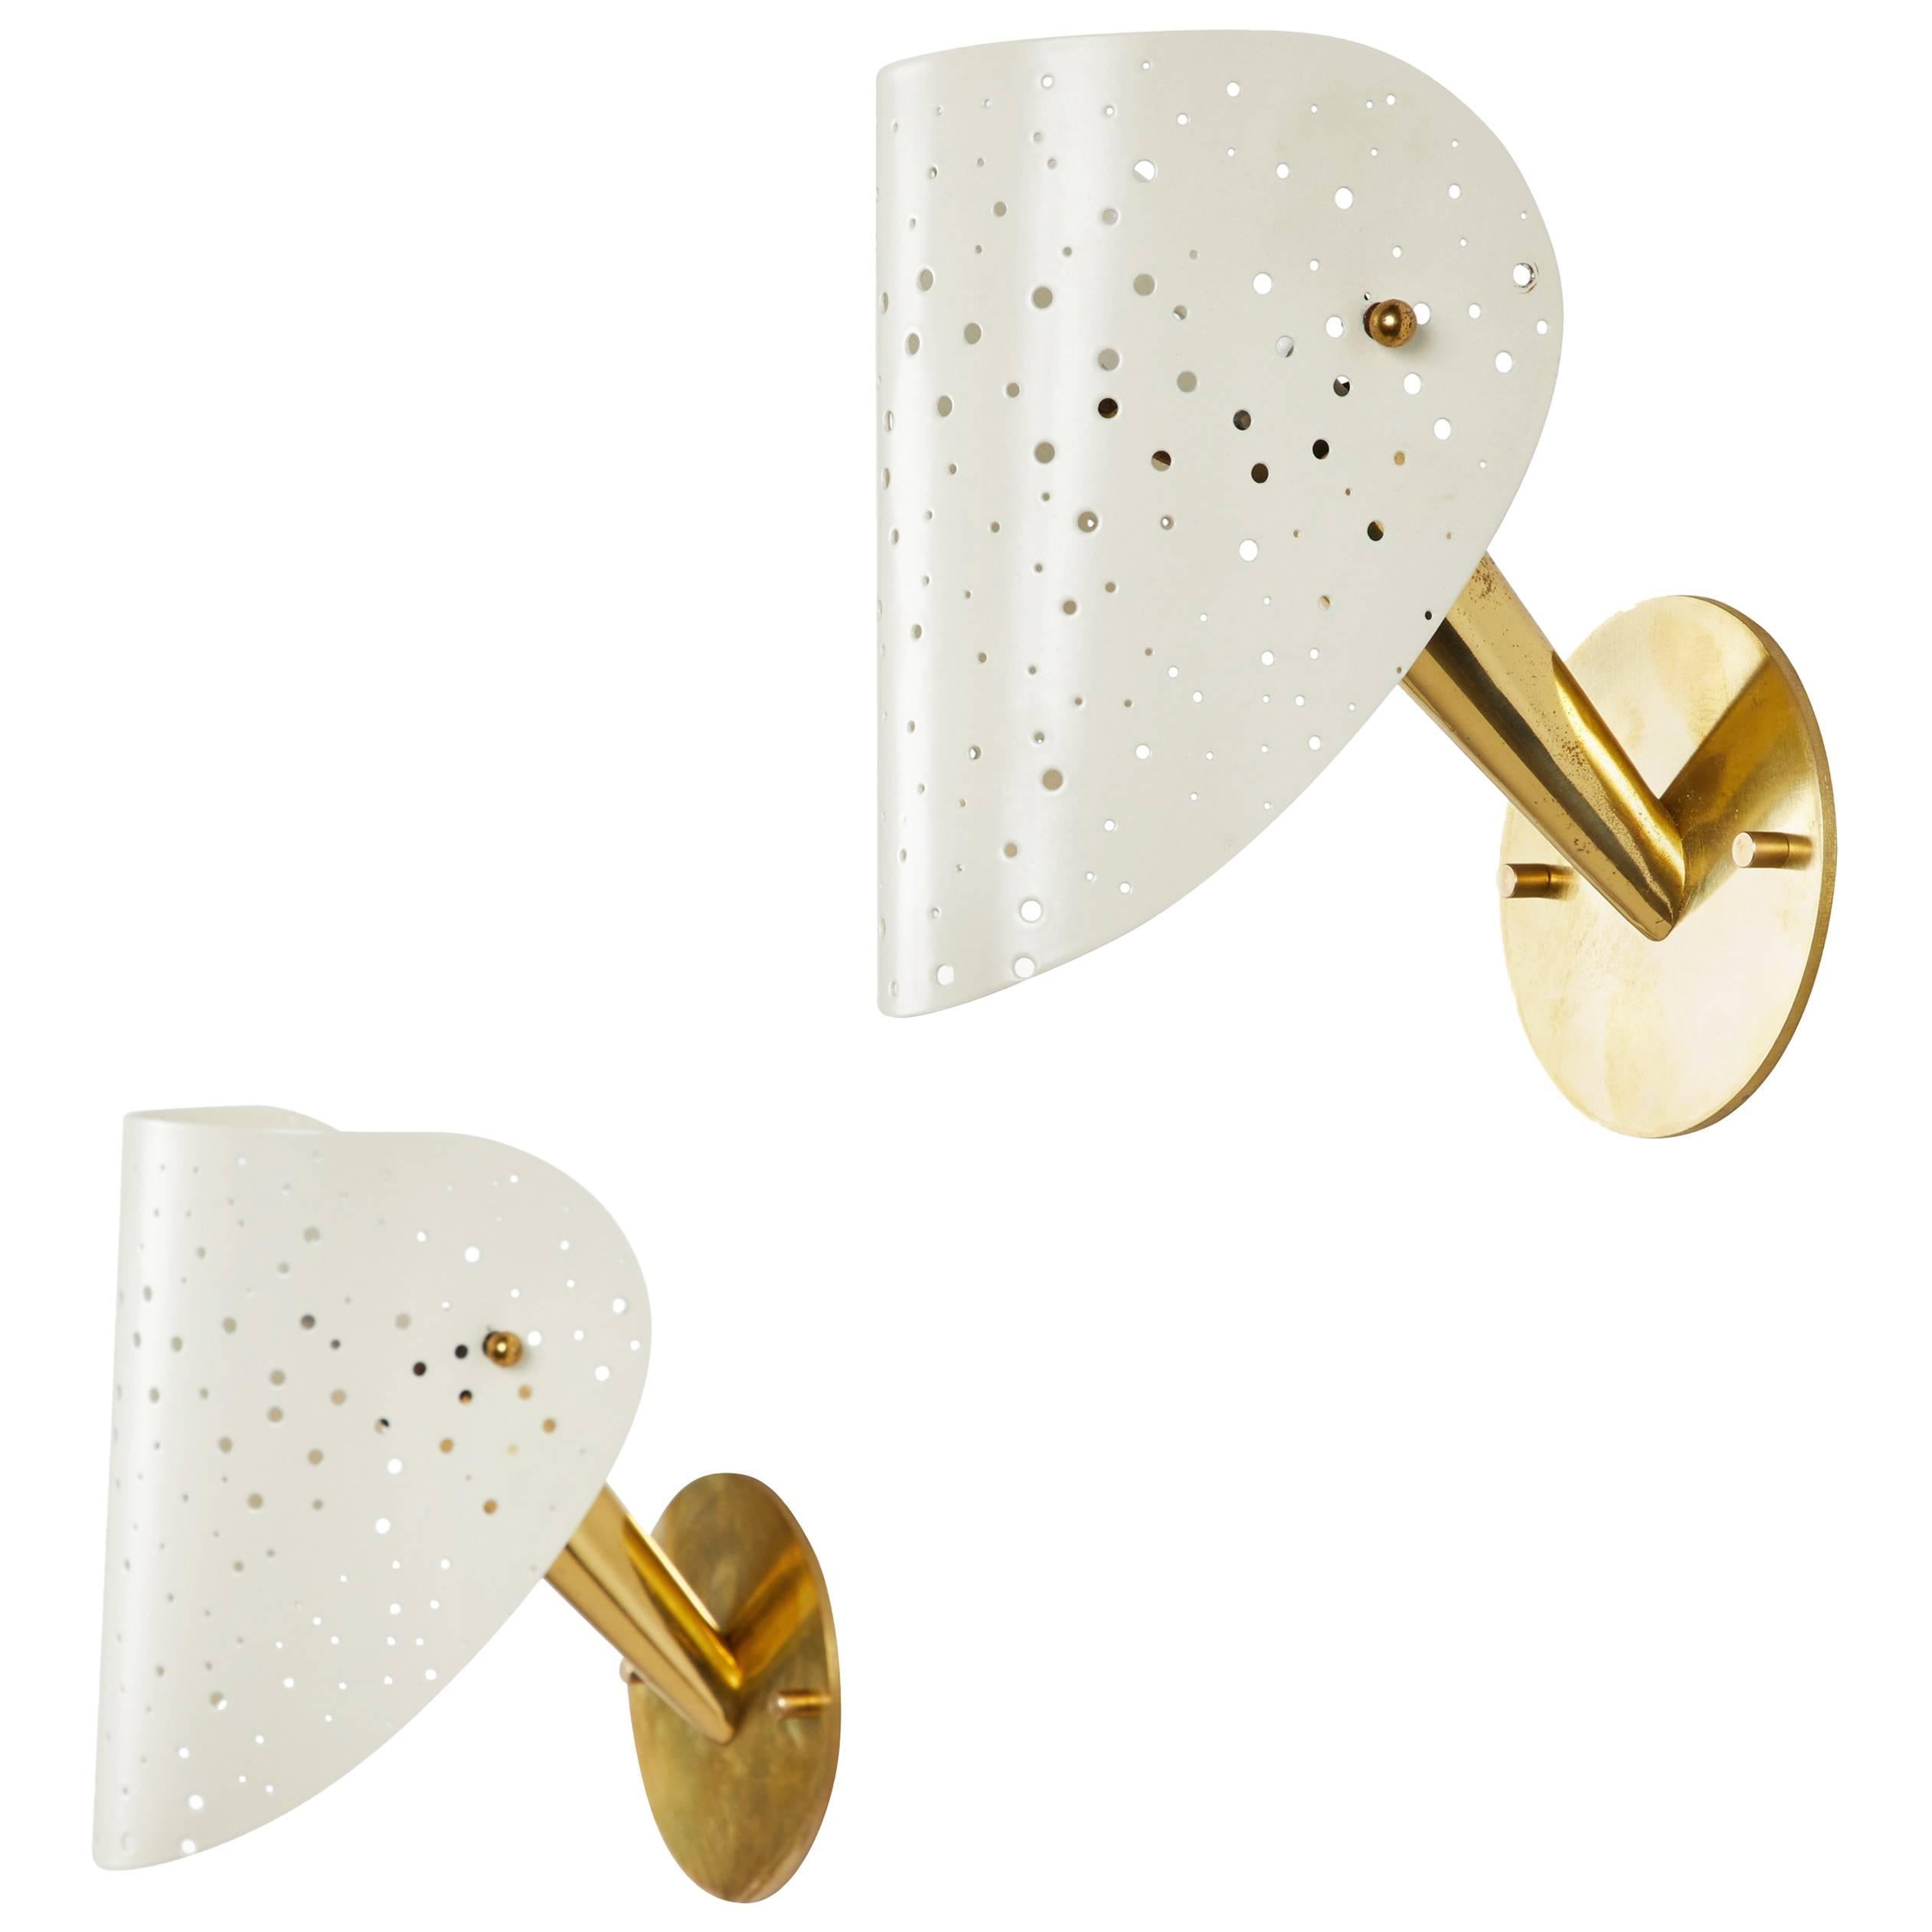 Pair of Perforated Italian Sconces